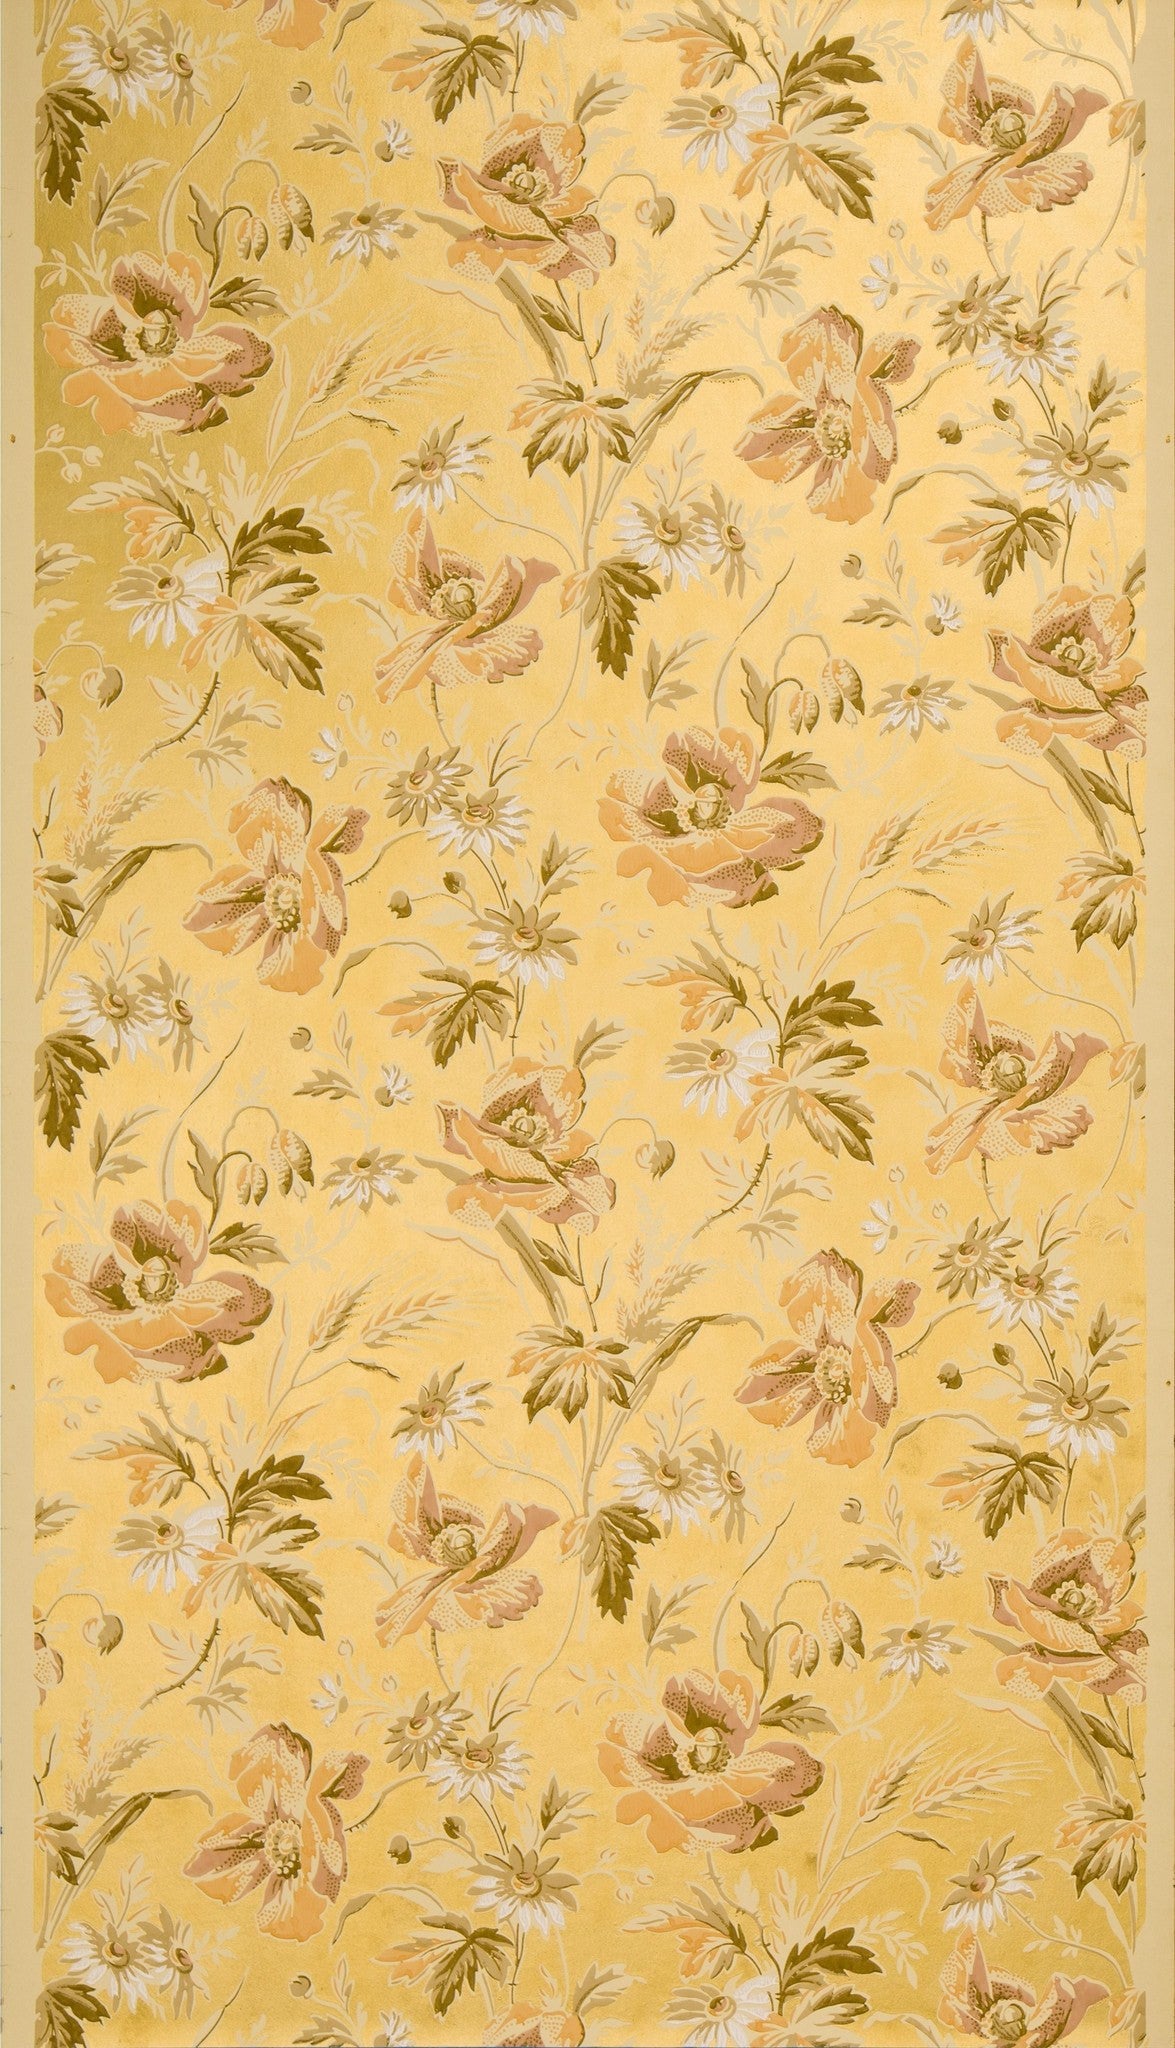 Poppies and Wheat on Gilt Background - Antique Wallpaper Remnant